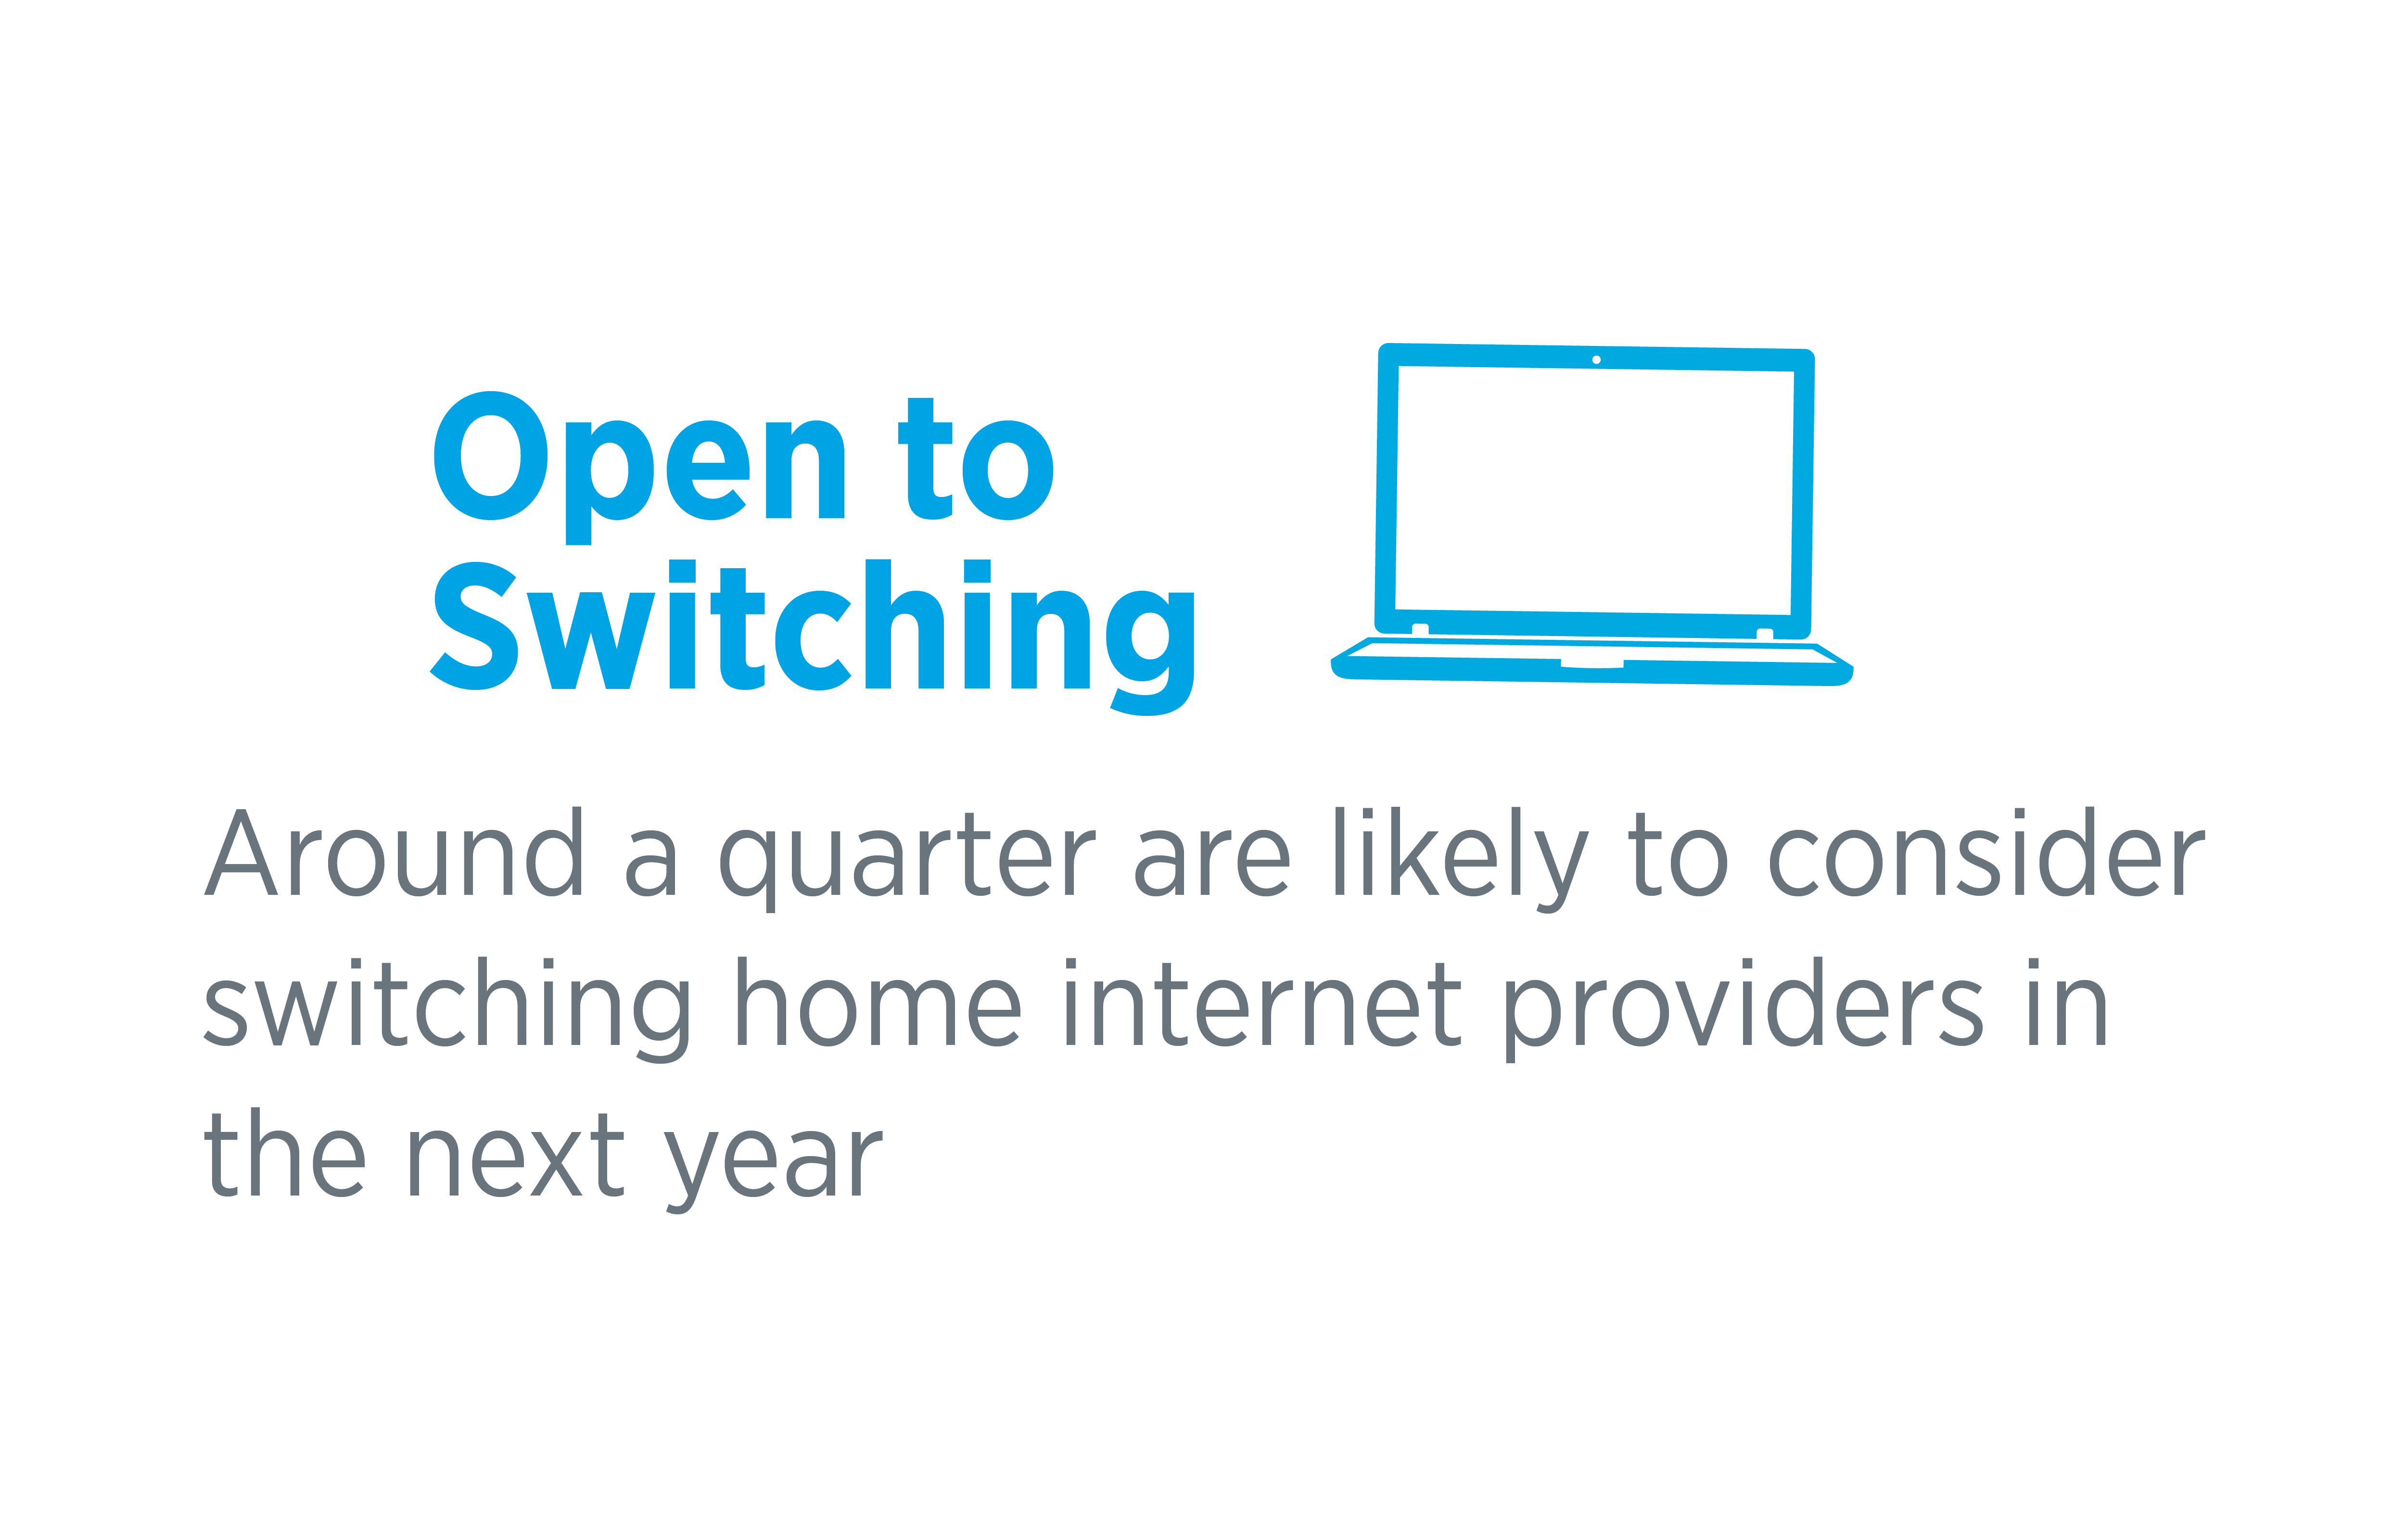 around a quarter are likely to consider switching home internet providers in the next year